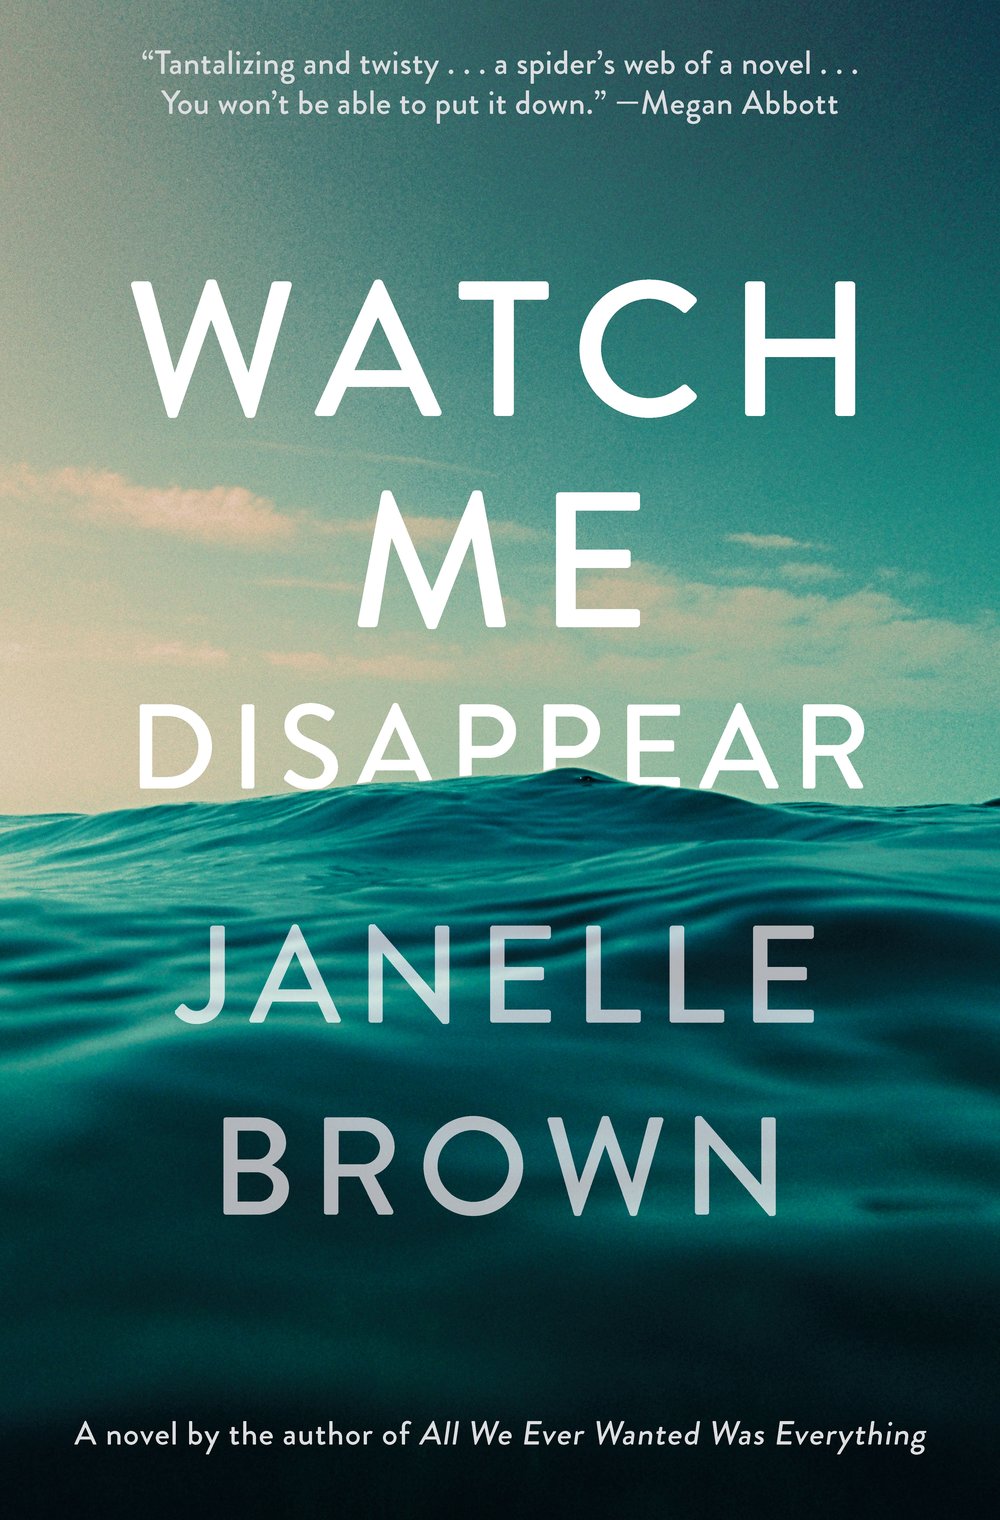 Janelle Brown – Watch Me Disappear